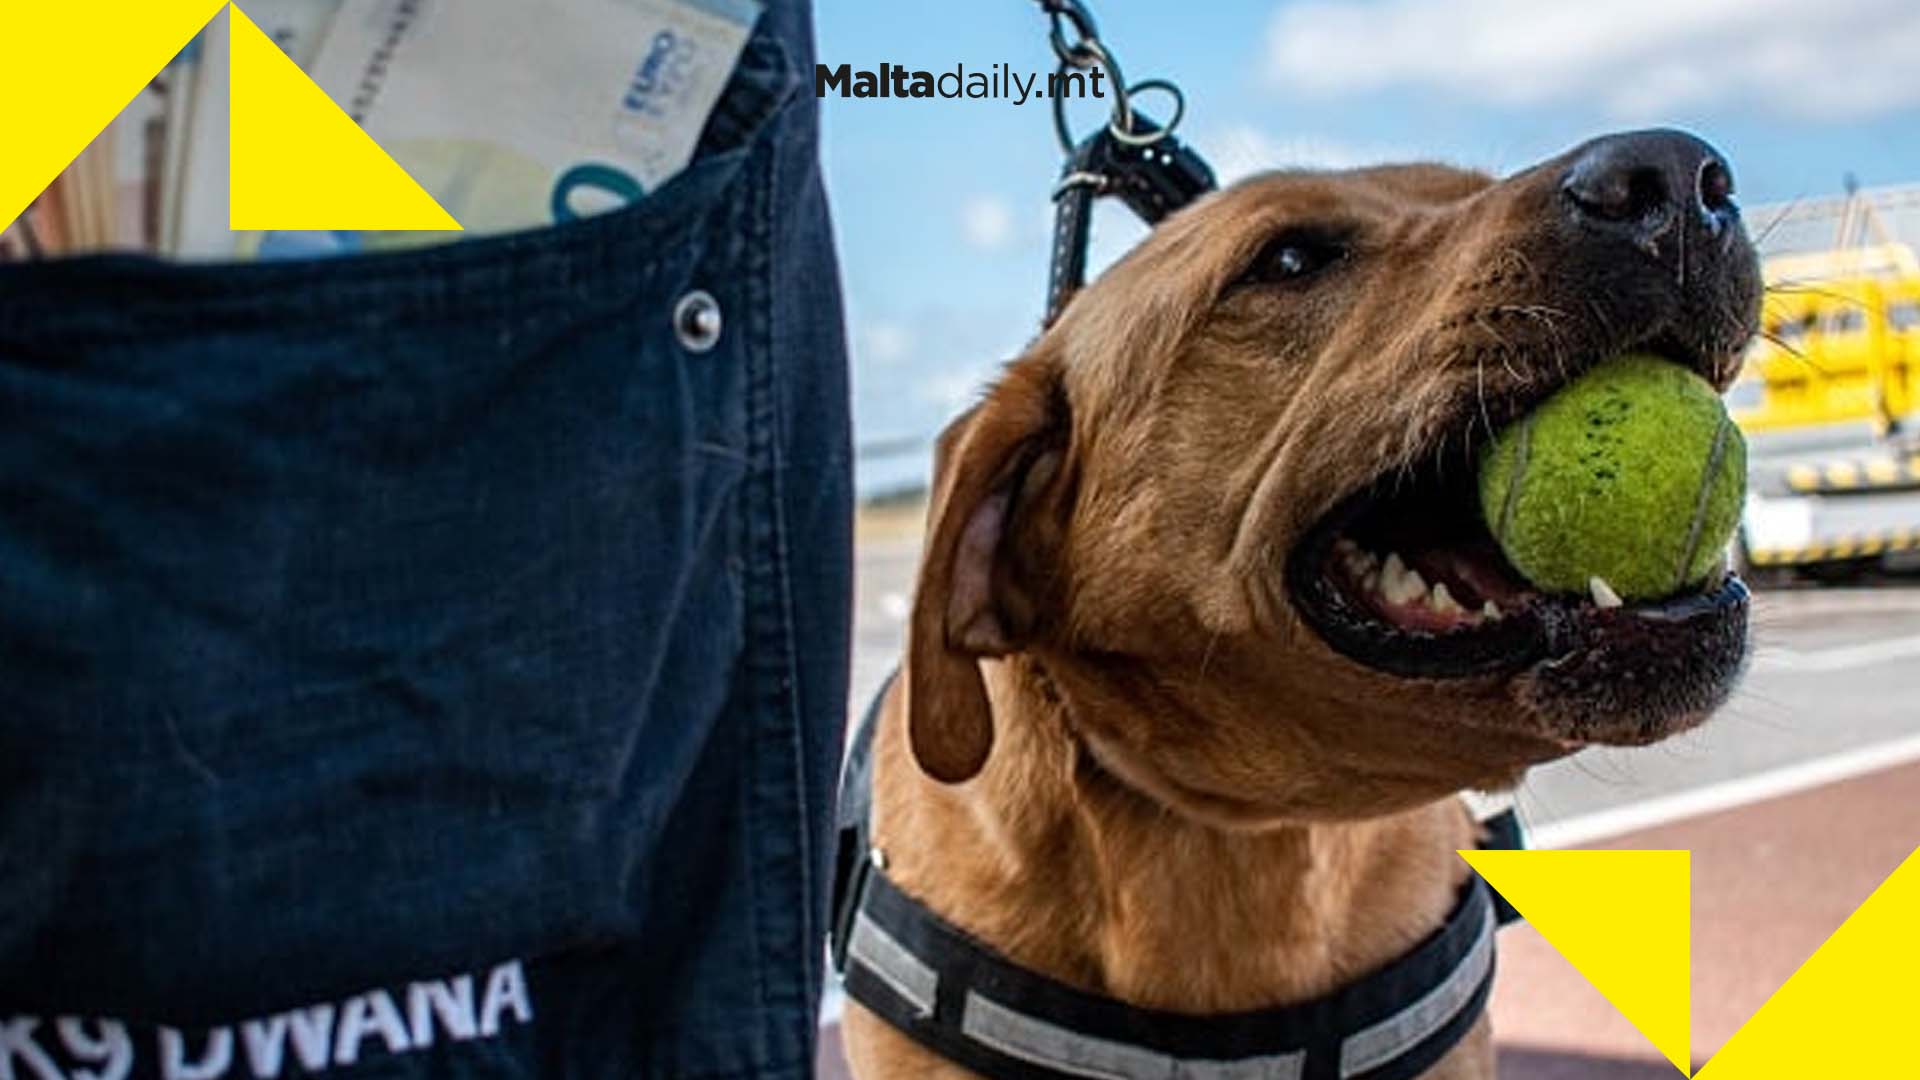 Customs canine Charlie intercepts €38,000 in undeclared cash